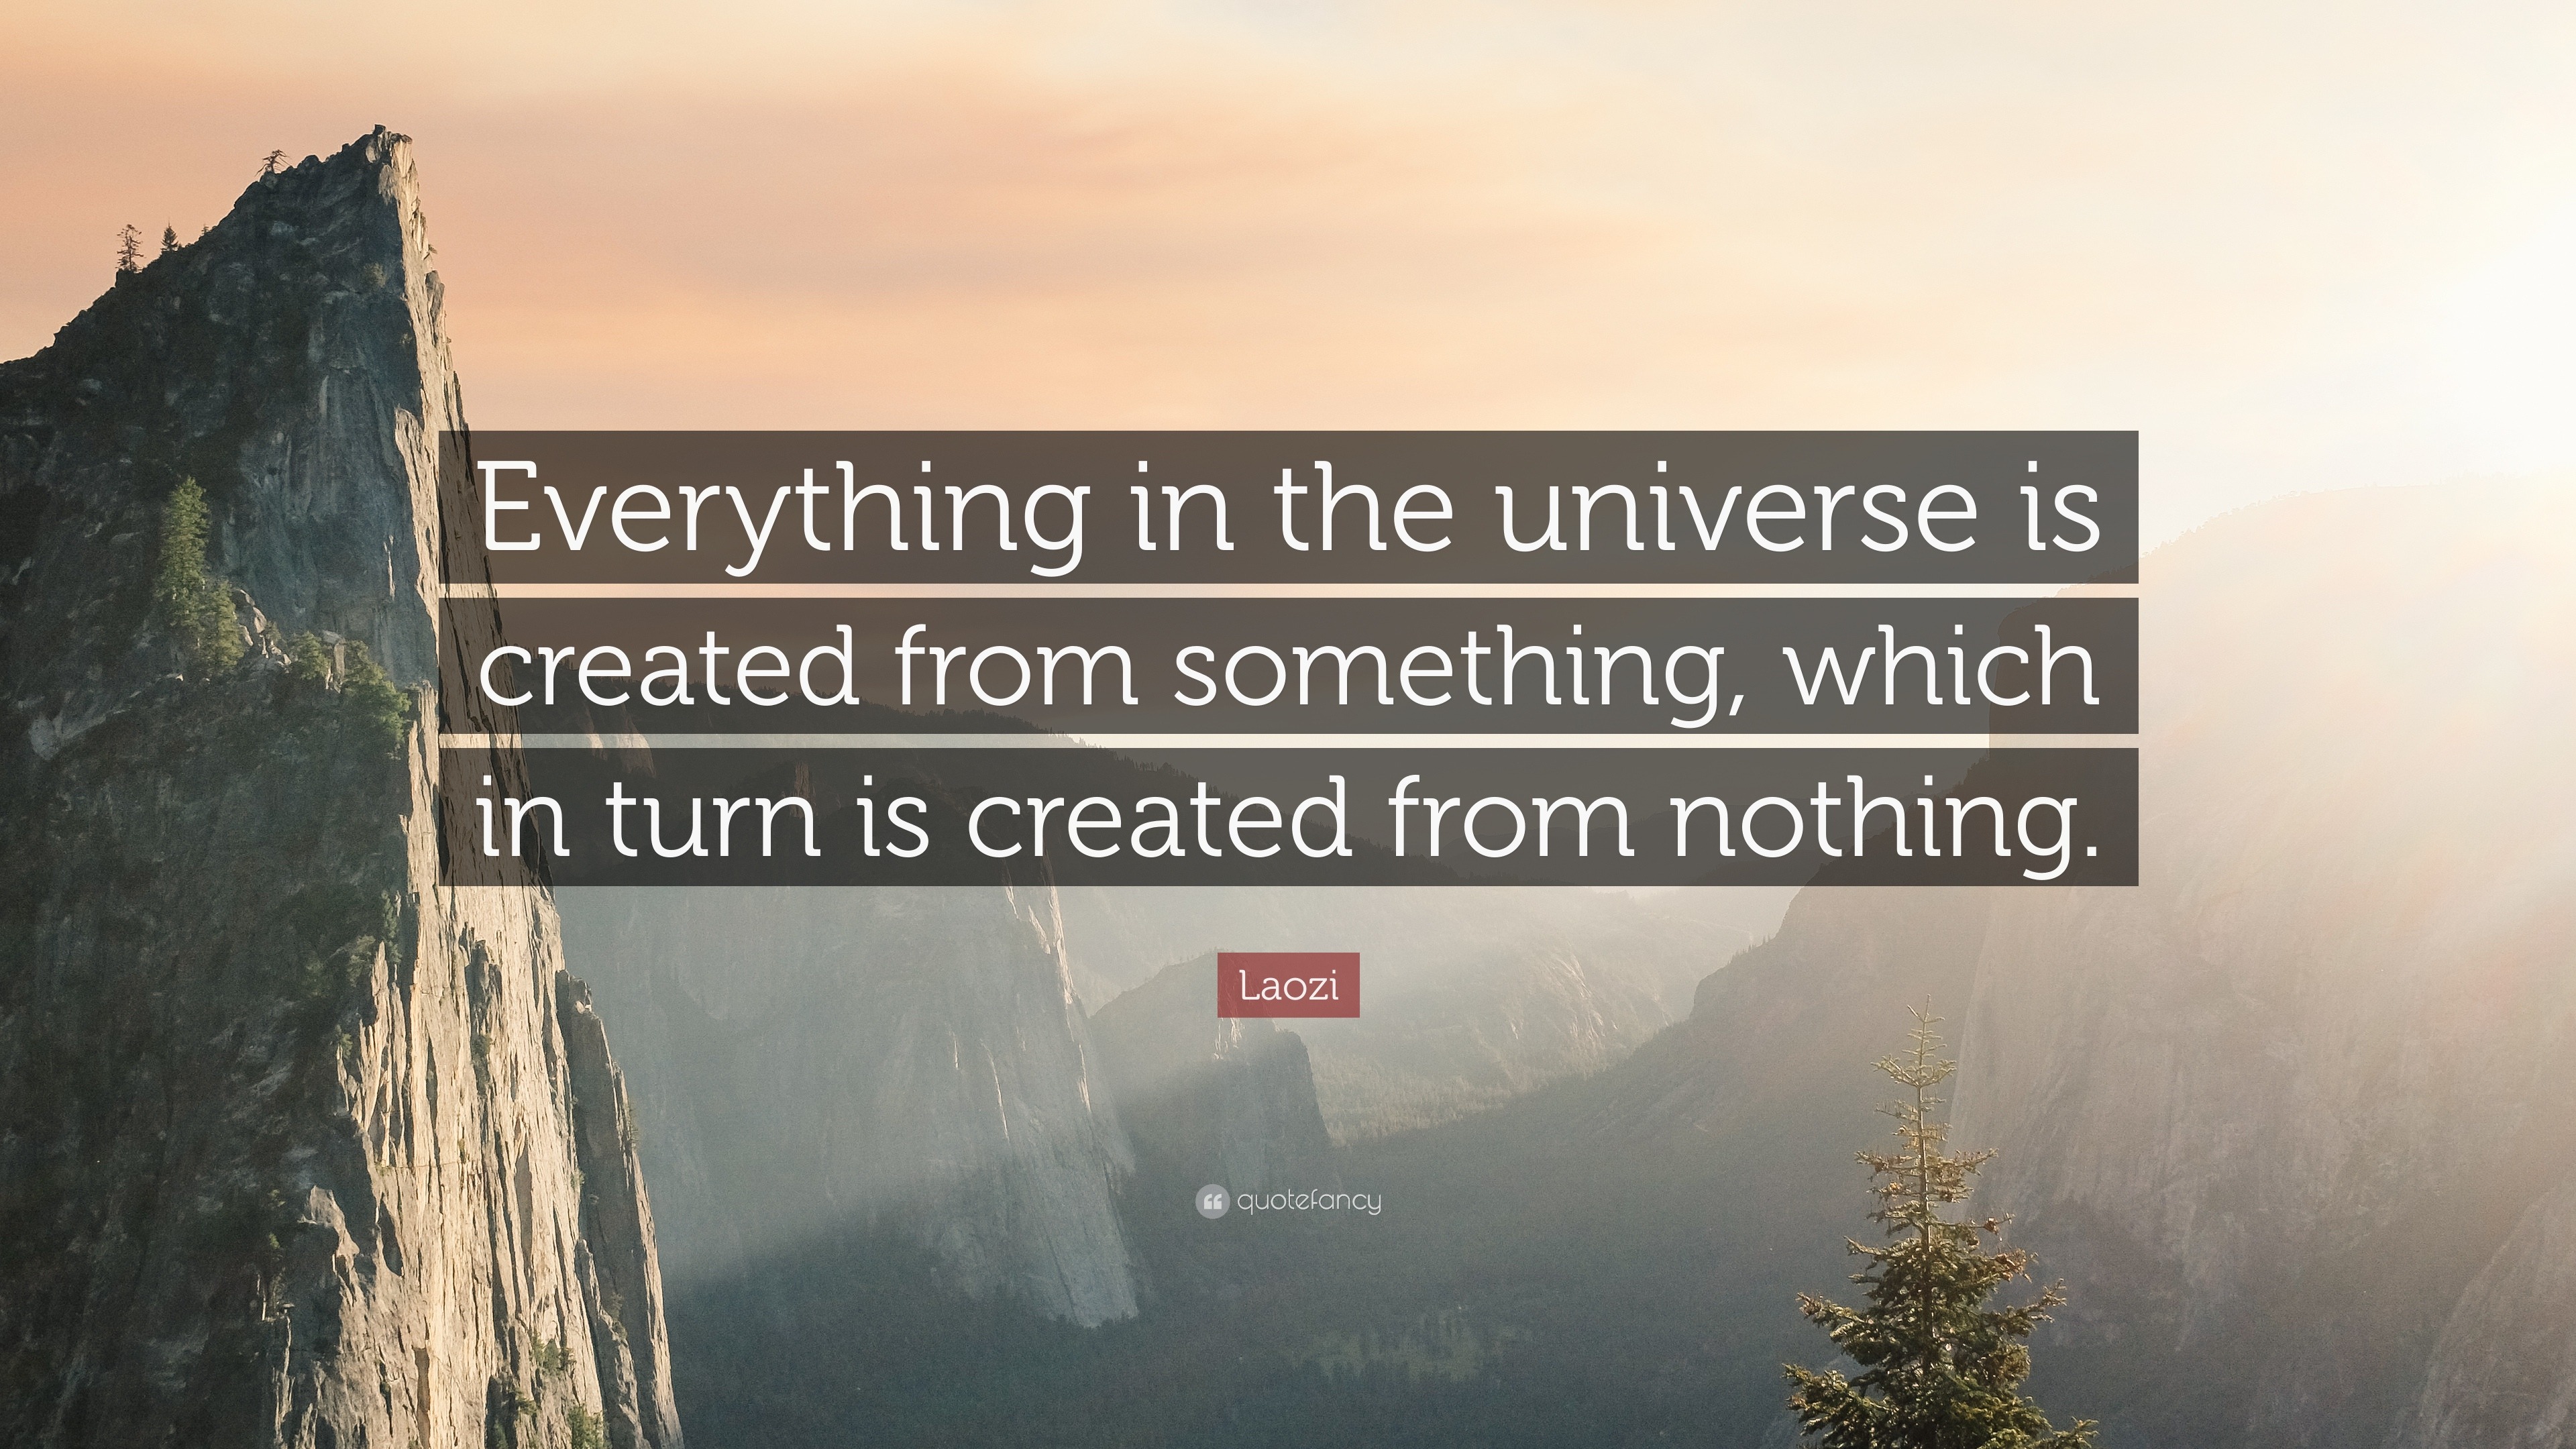 Laozi Quote: “Everything in the universe is created from something ...